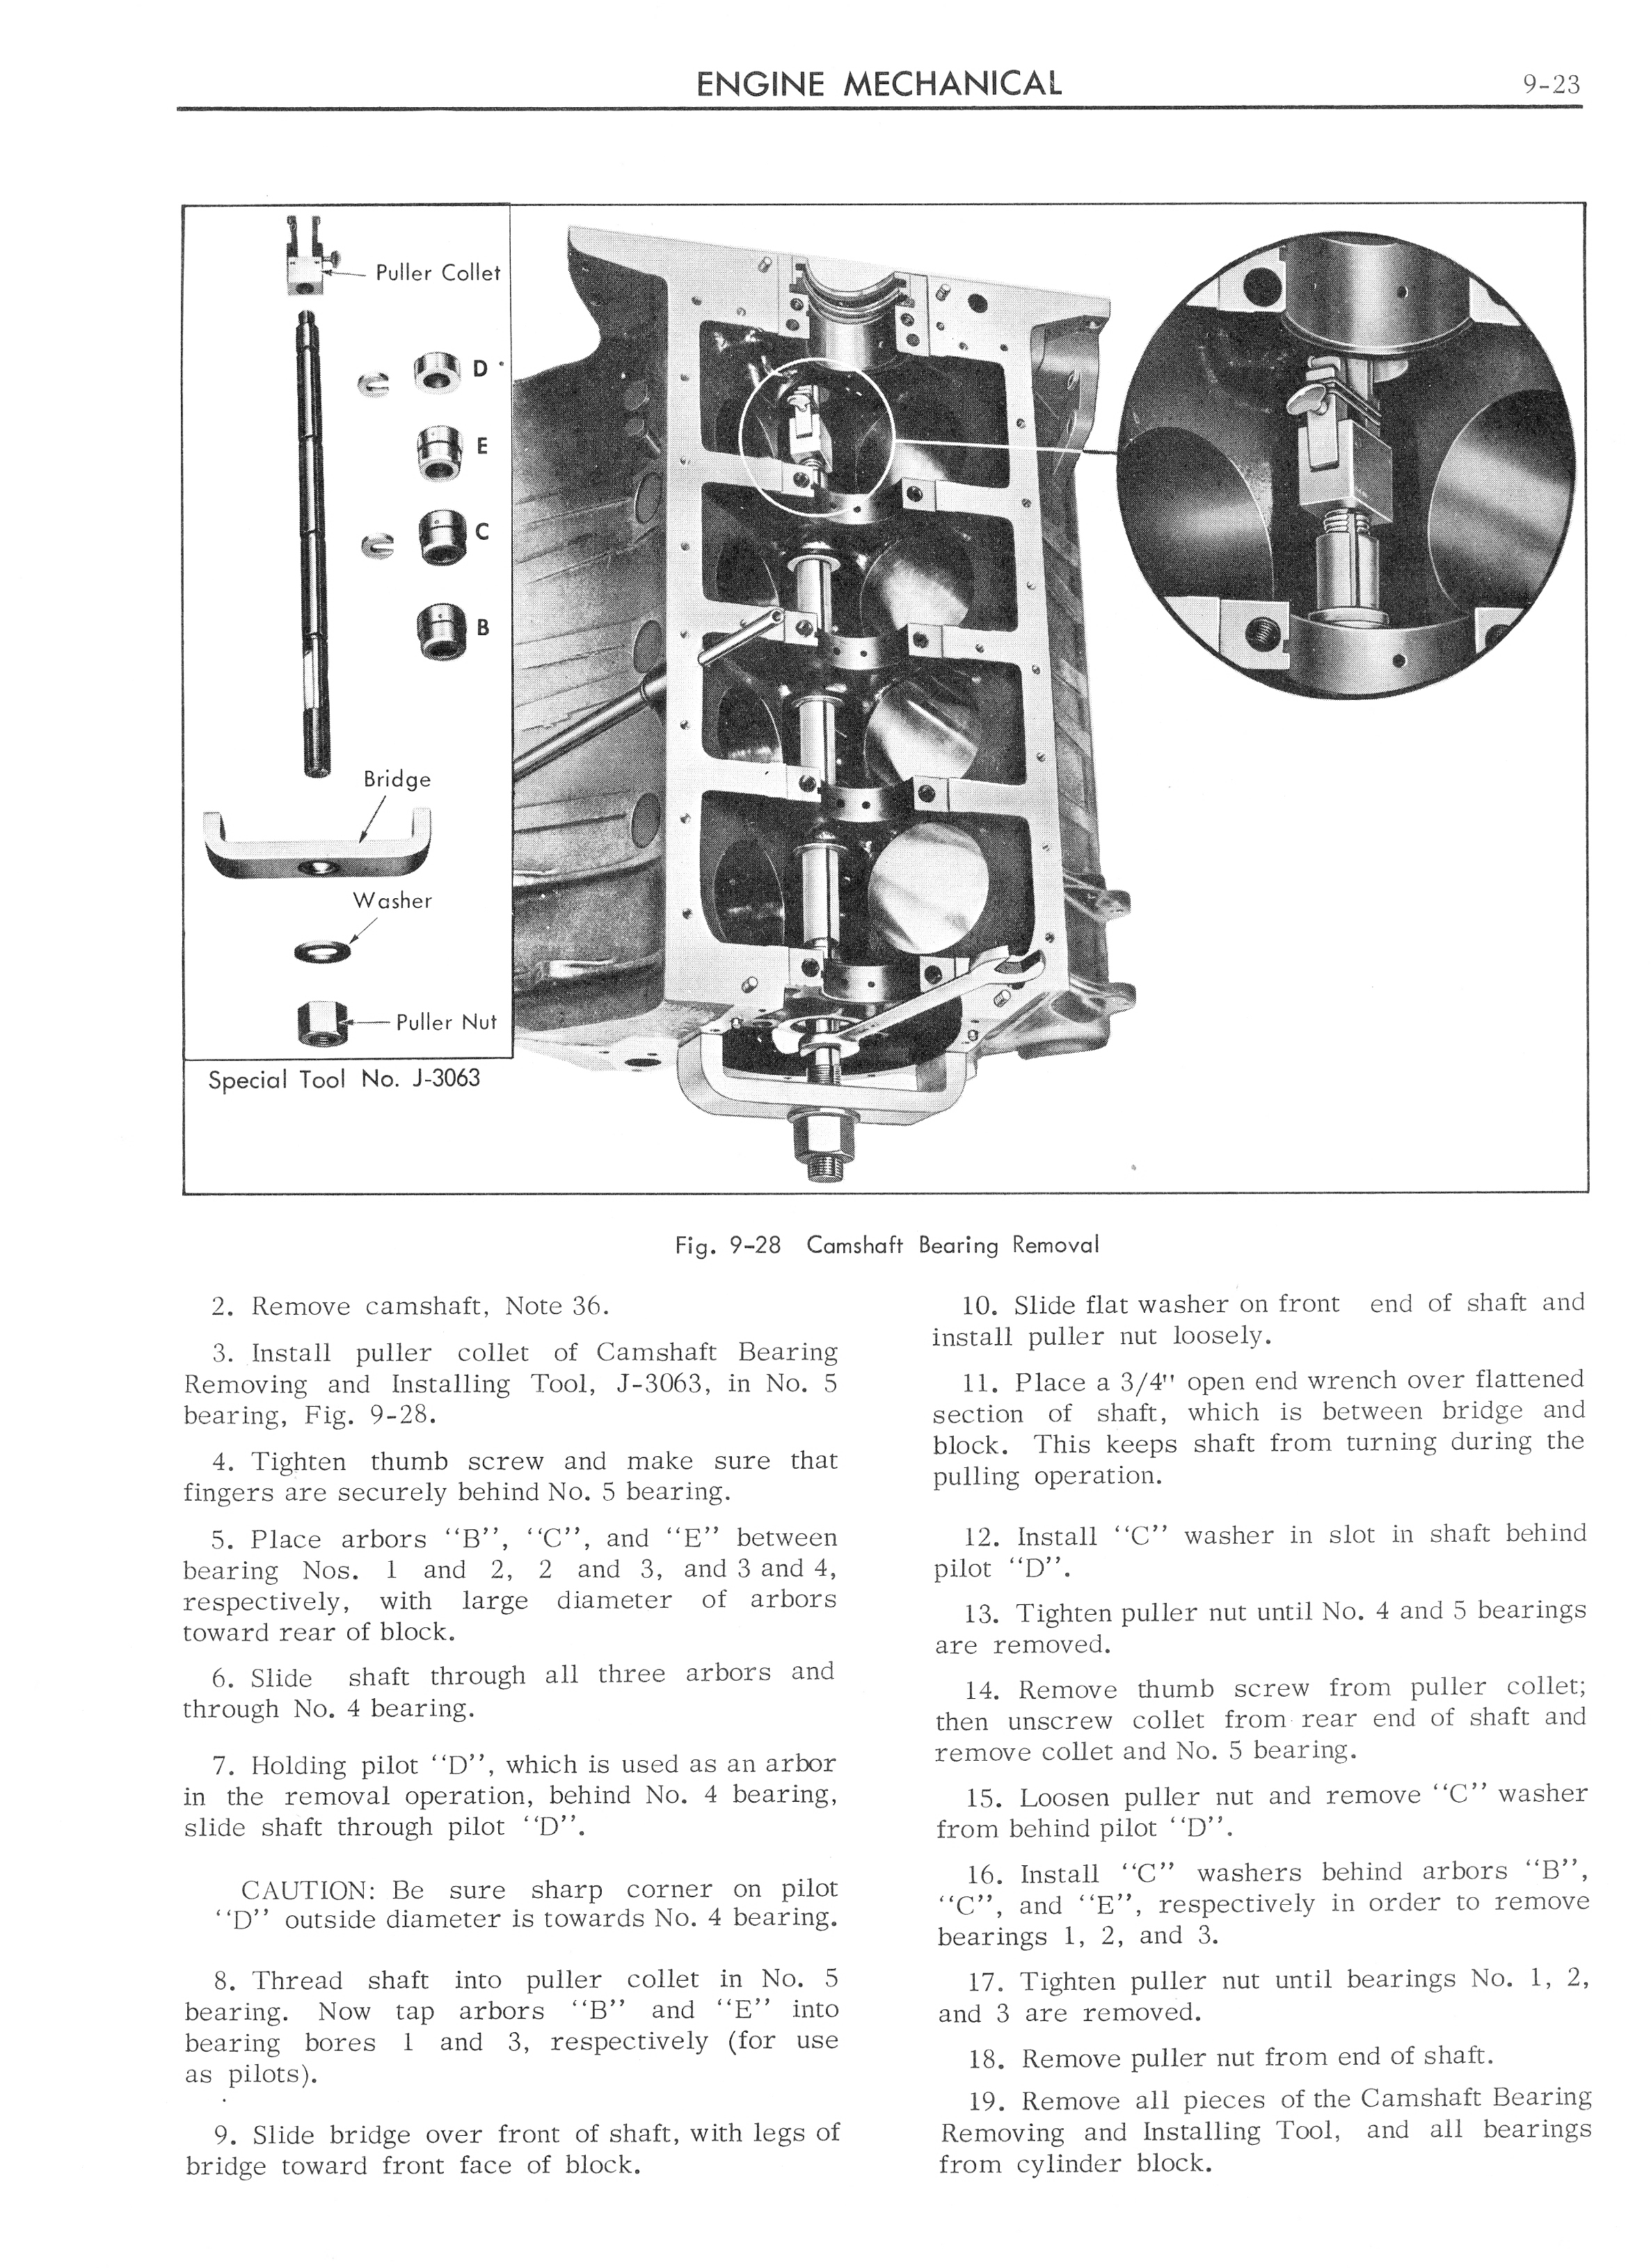 1962 Cadillac Shop Manual - Engine Mechanical Page 23 of 32